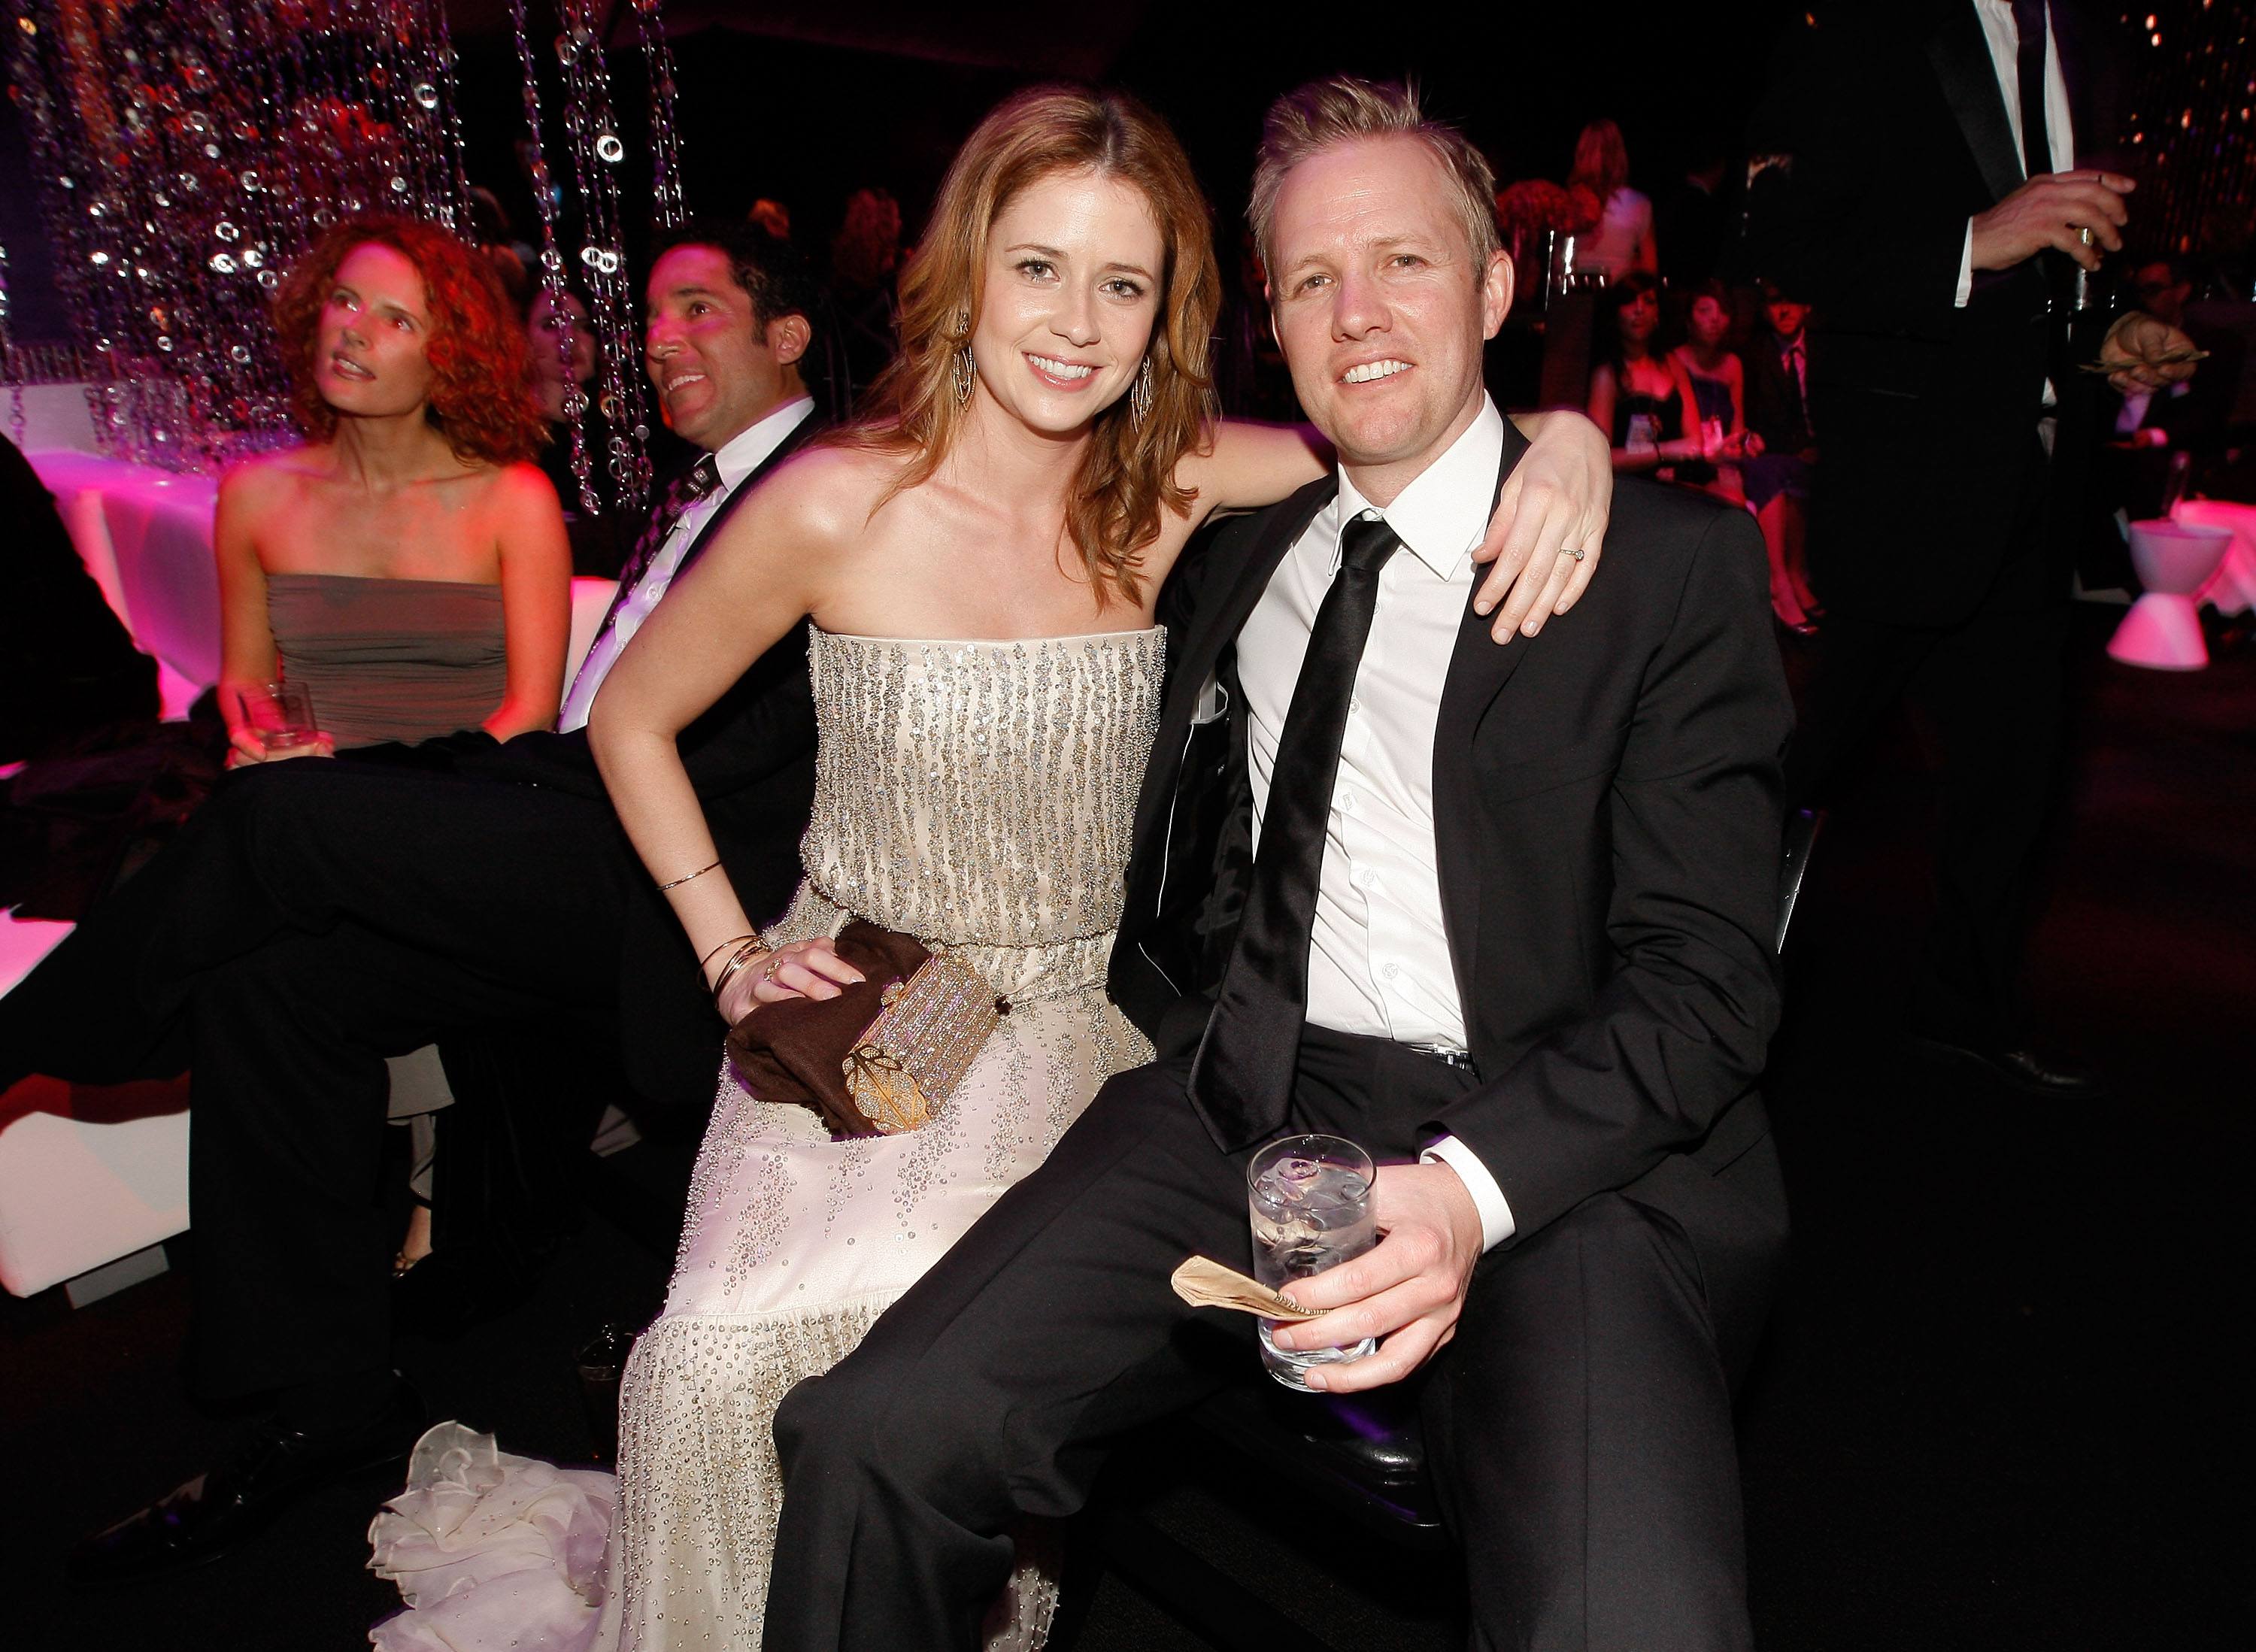 Who is Lee Kirk, Jenna Fischer’s Husband, and How Long Have They Been Married?